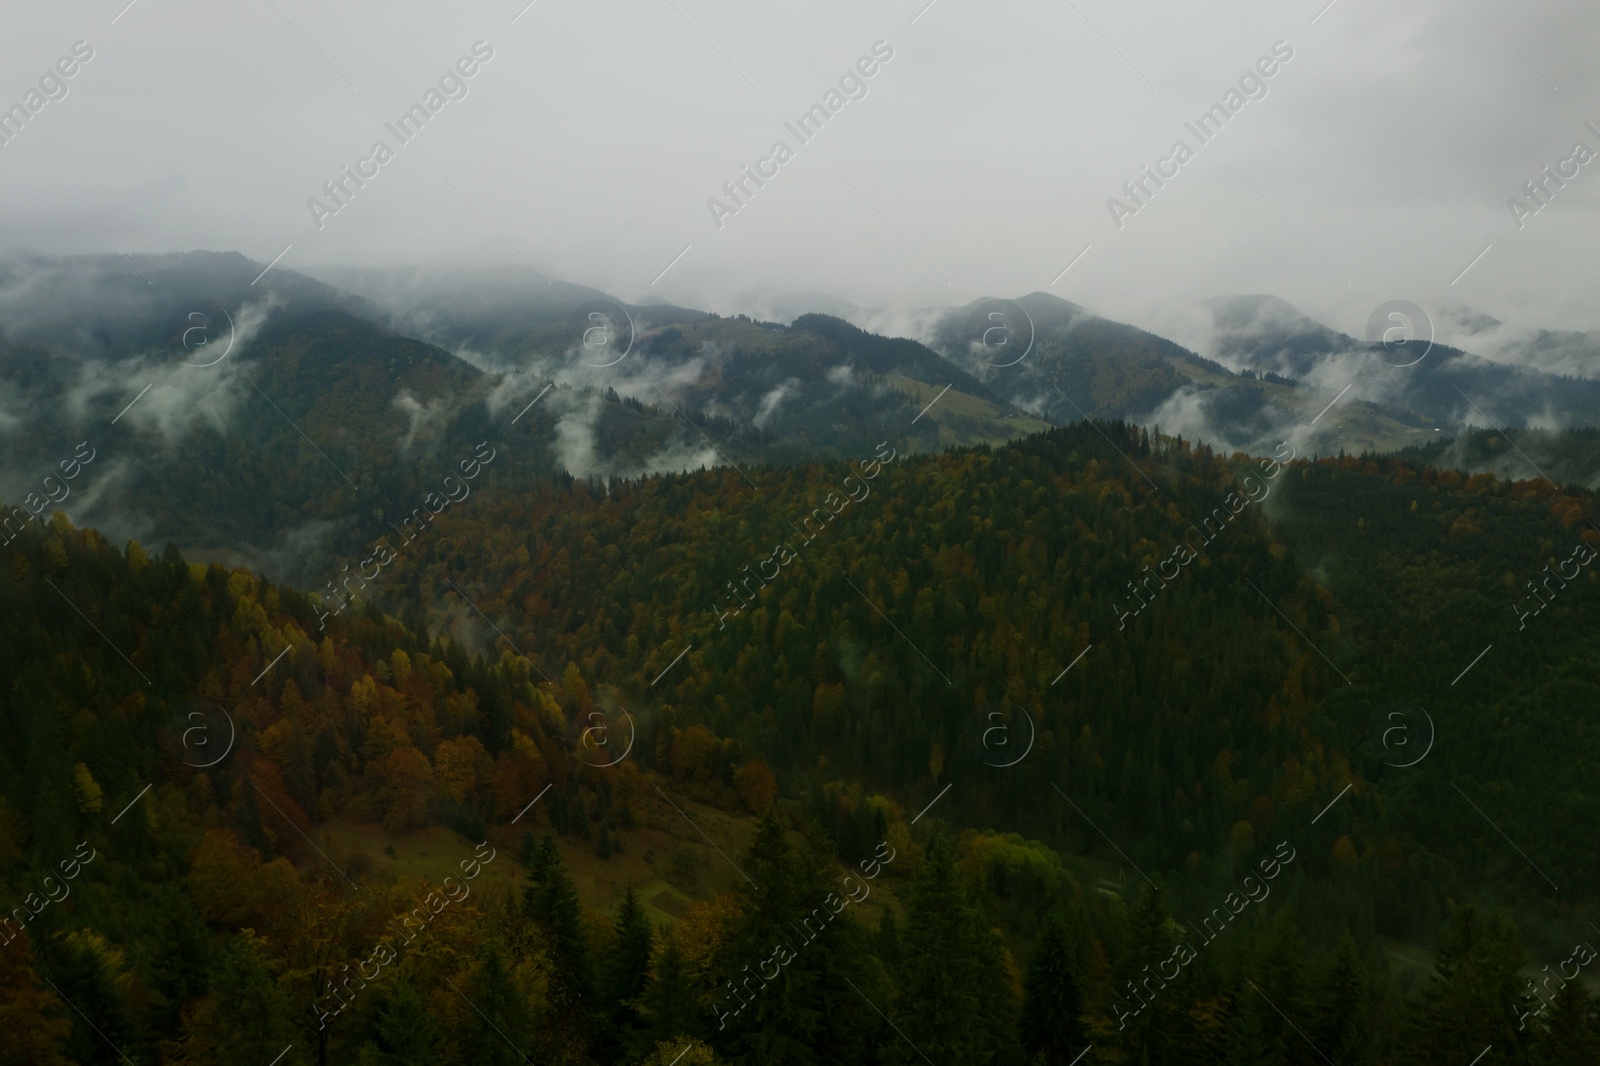 Image of Aerial view of mountains covered with fog